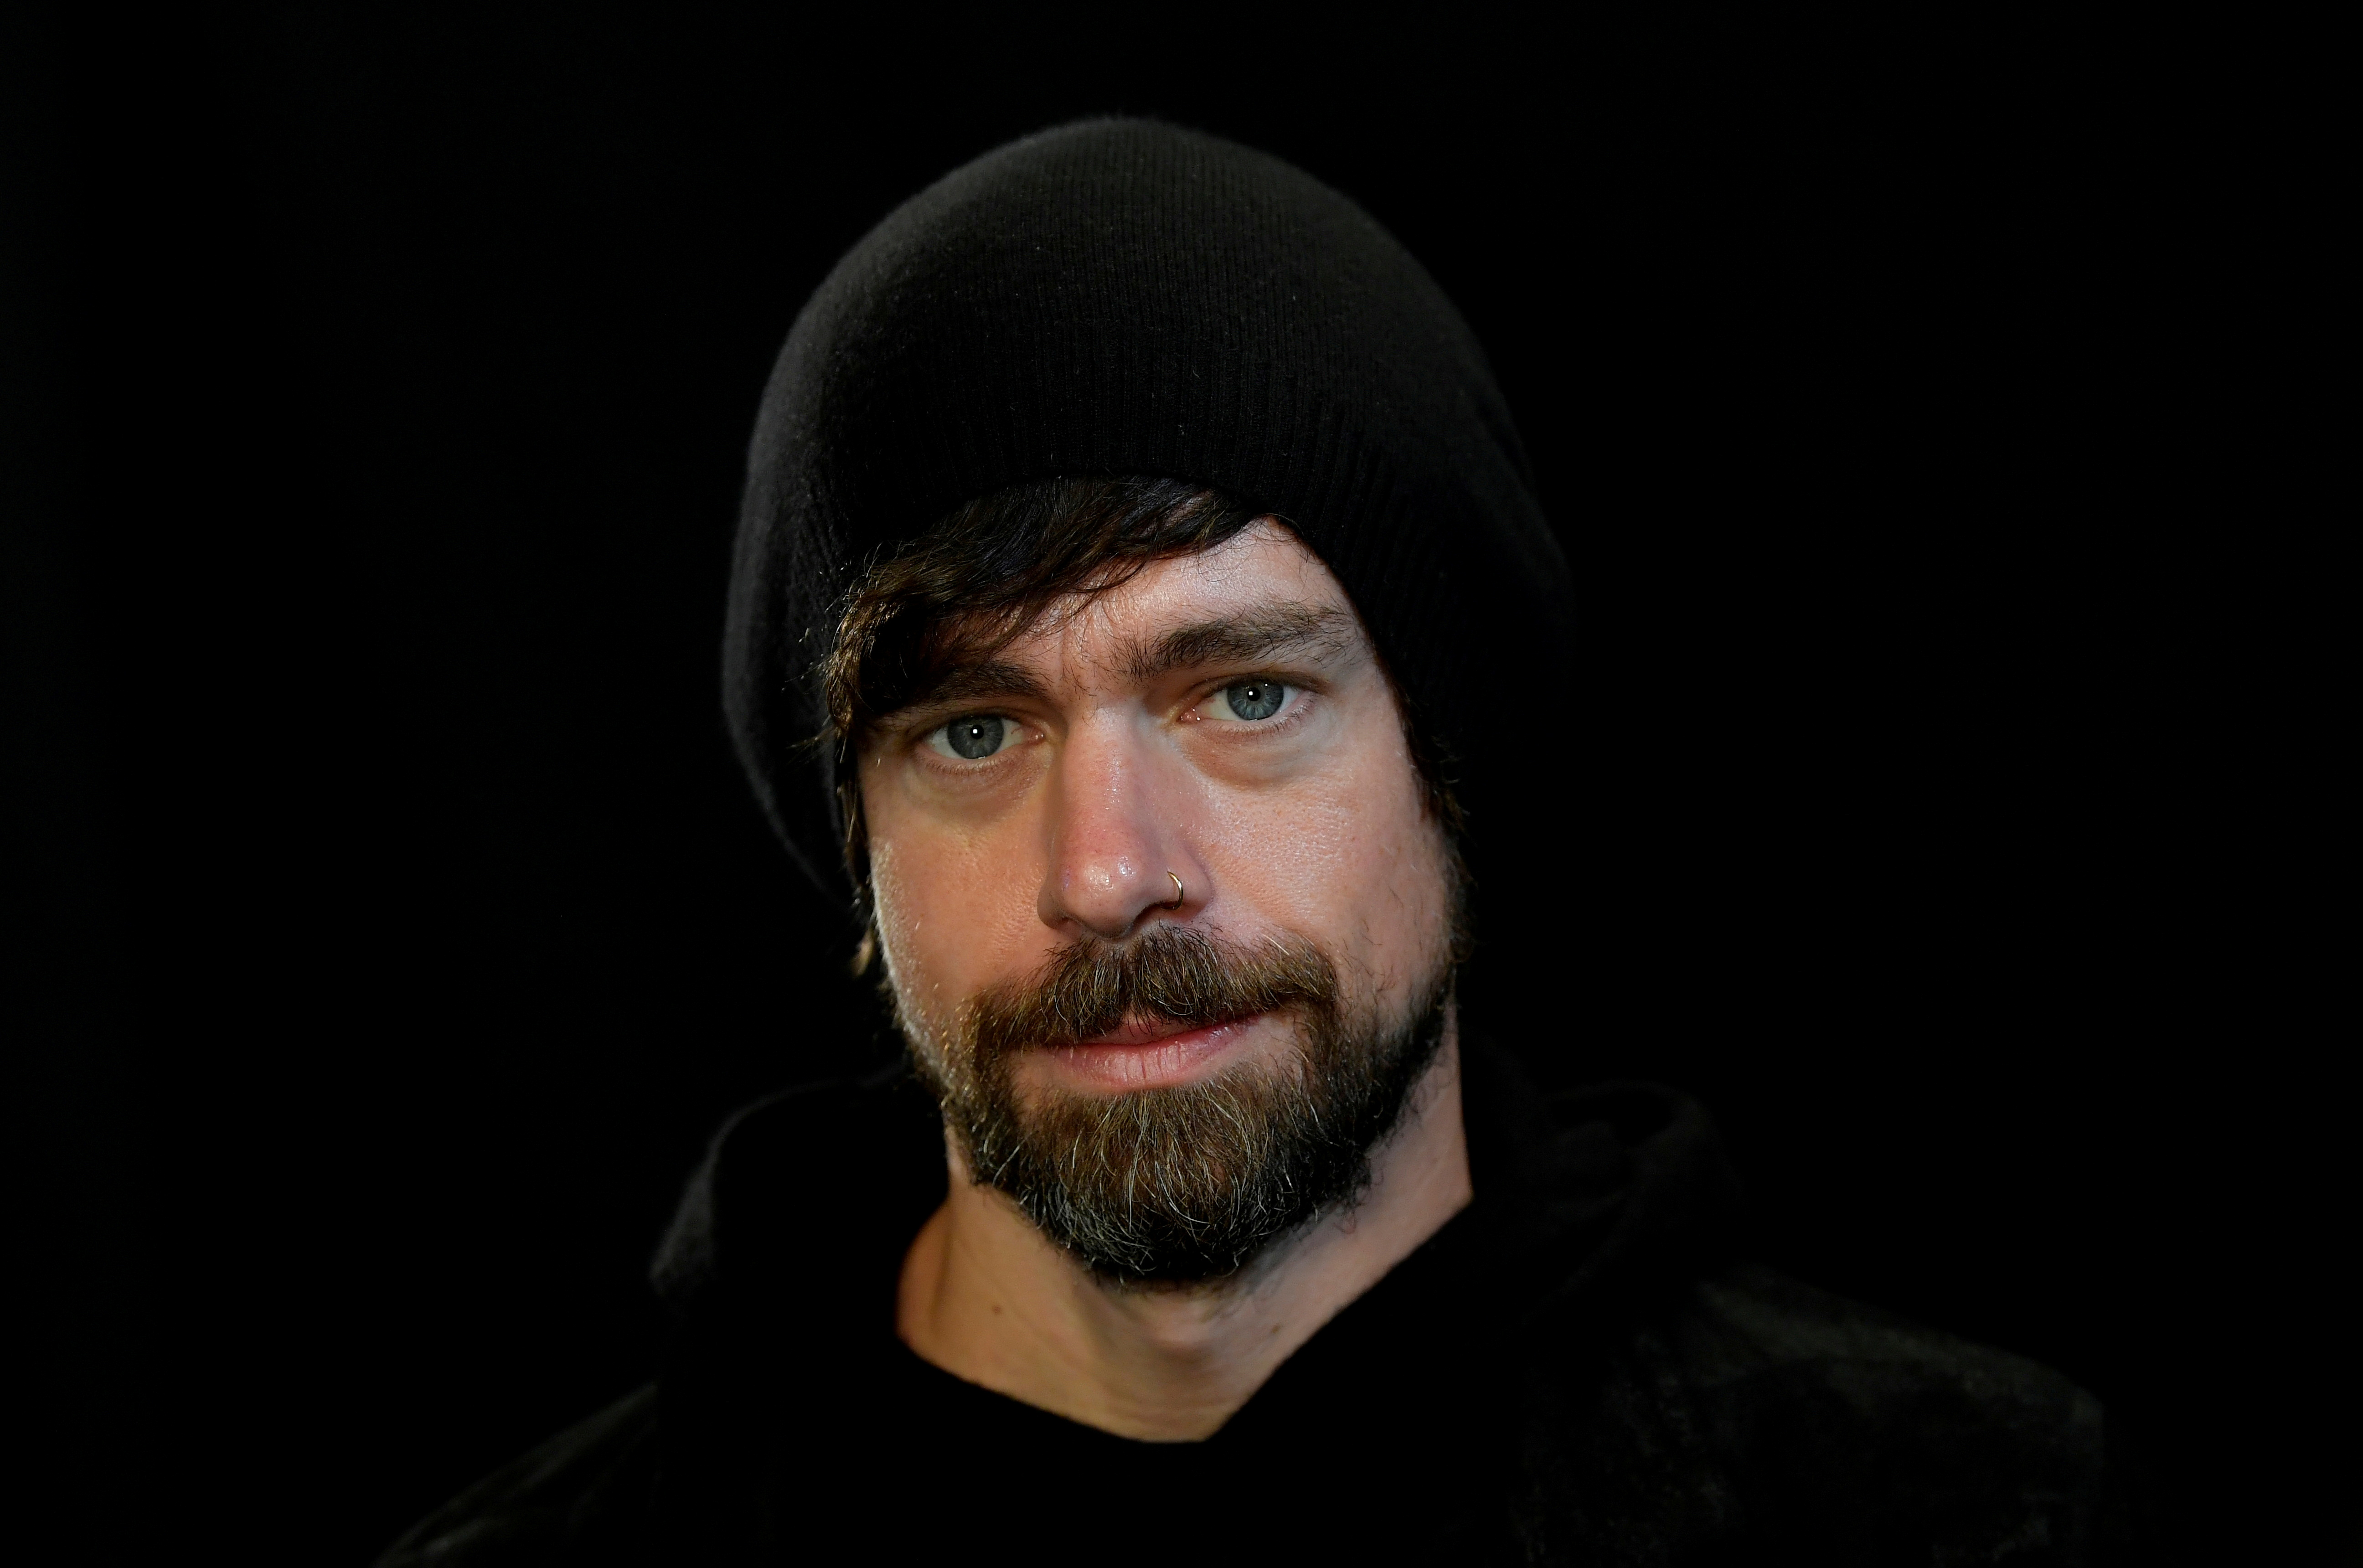 Jack Dorsey, co-founder of Twitter and fintech firm Square, sits for a portrait during an interview with Reuters in London, Britain, June 11, 2019. REUTERS/Toby Melville